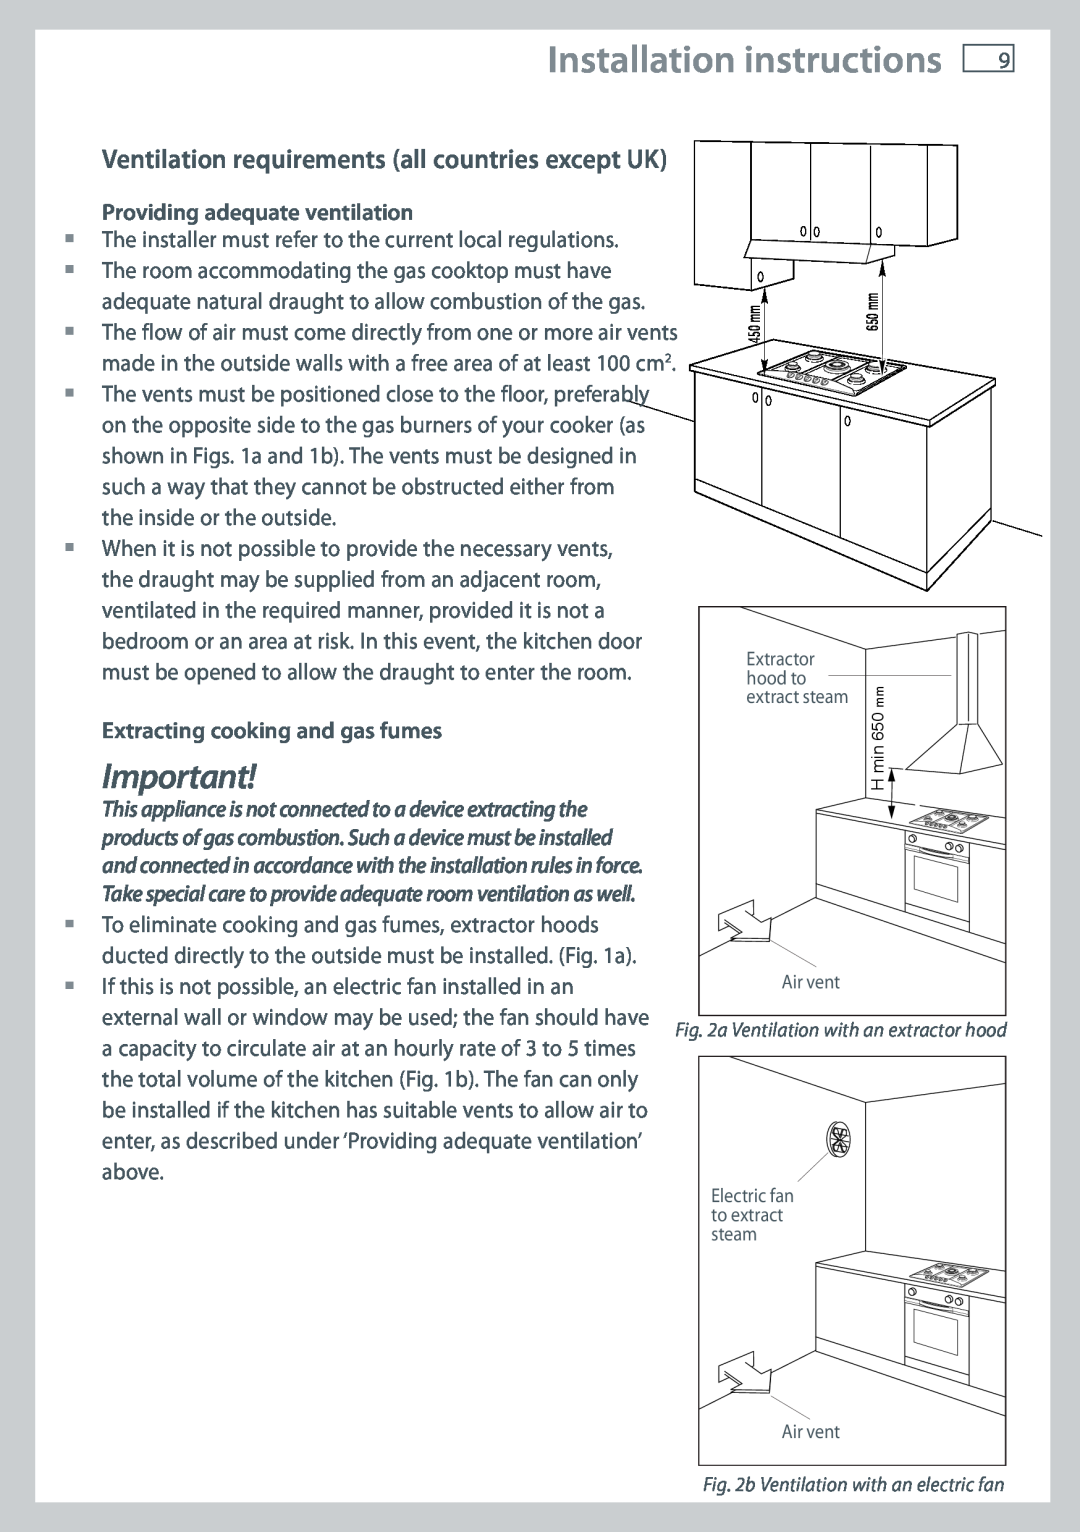 Fisher & Paykel CG705 installation instructions Ventilation requirements all countries except UK, Installation instructions 